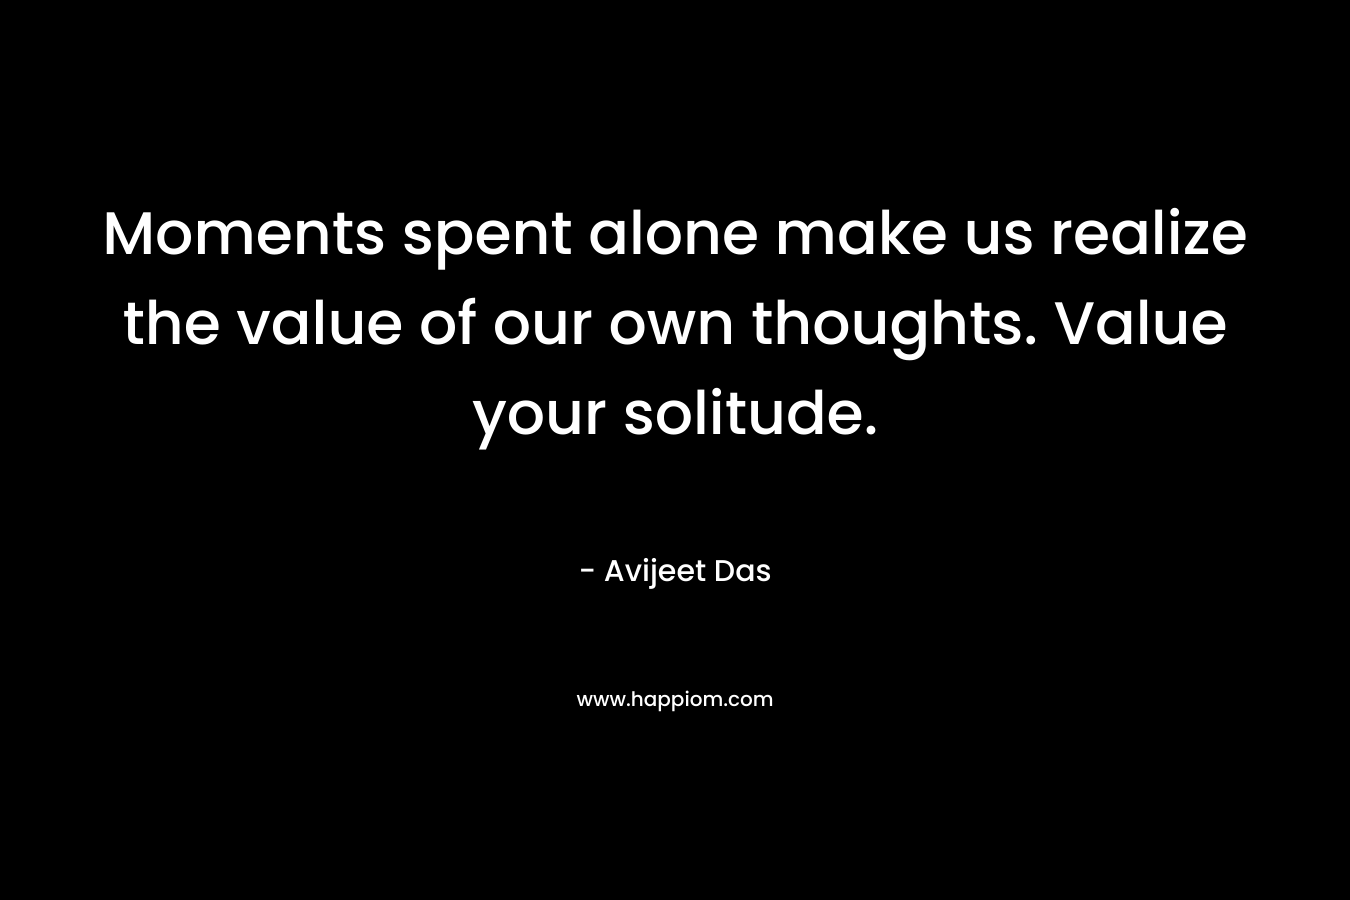 Moments spent alone make us realize the value of our own thoughts. Value your solitude.